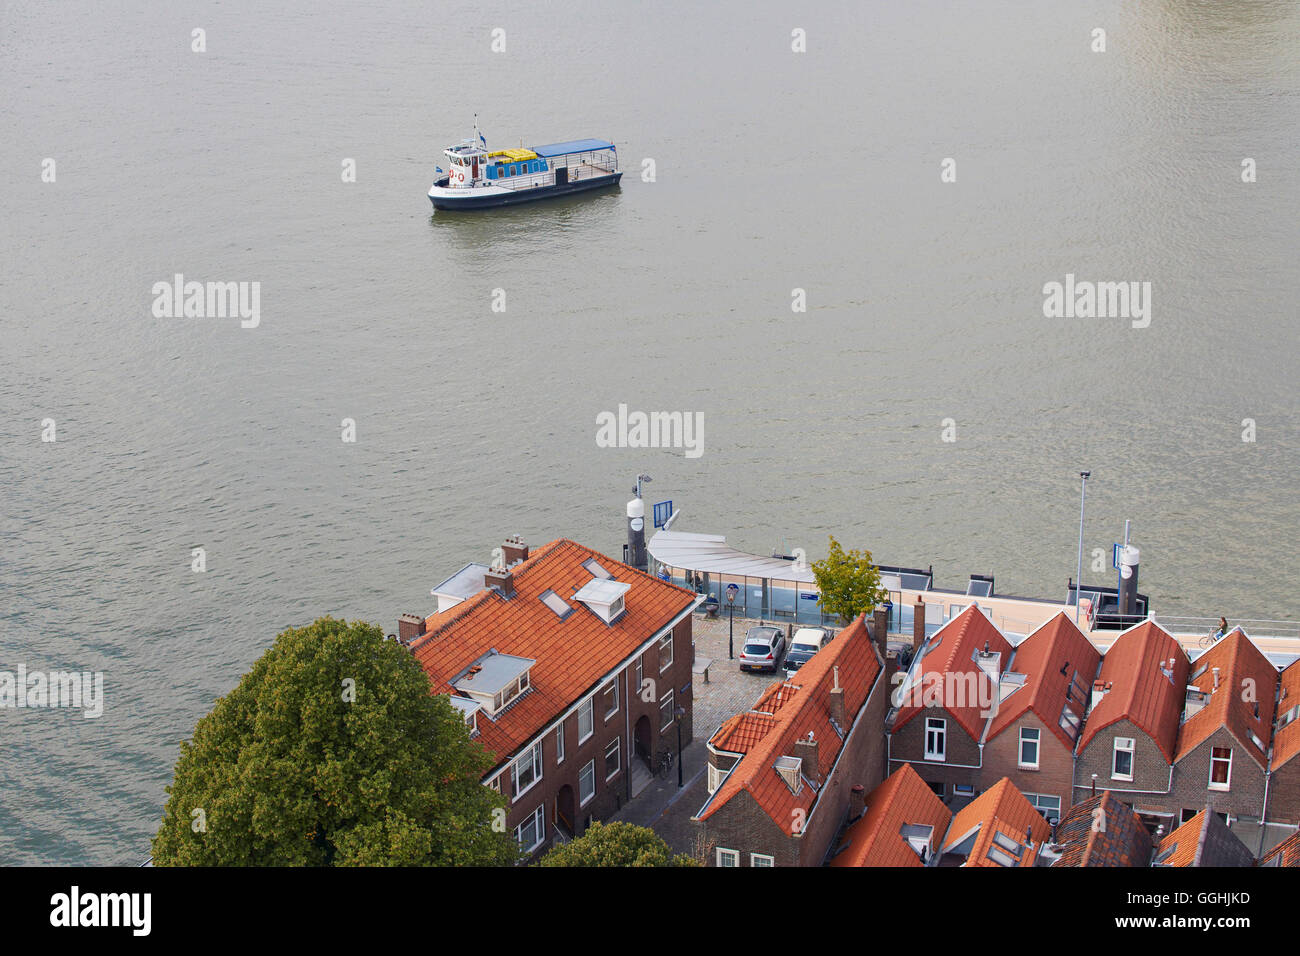 View from the tower of Grote Kerk to the old city of Dordrecht and the waterway Oude Maas, Province of Southern Netherlands, Sou Stock Photo